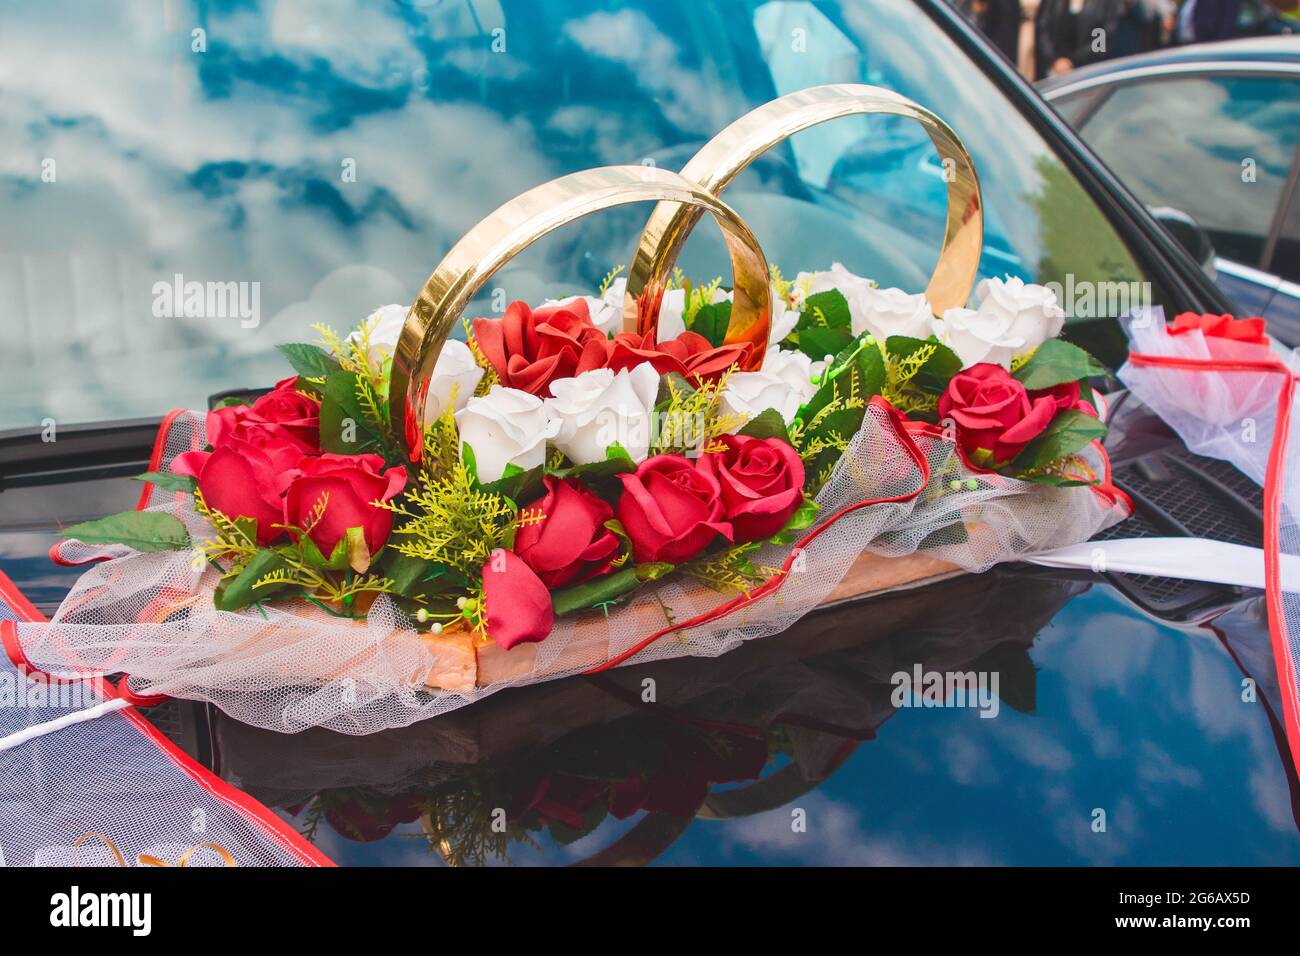 Wedding decoration of the car in the form of rings, artificial colors of red and white roses on the hood of the car. Stock Photo